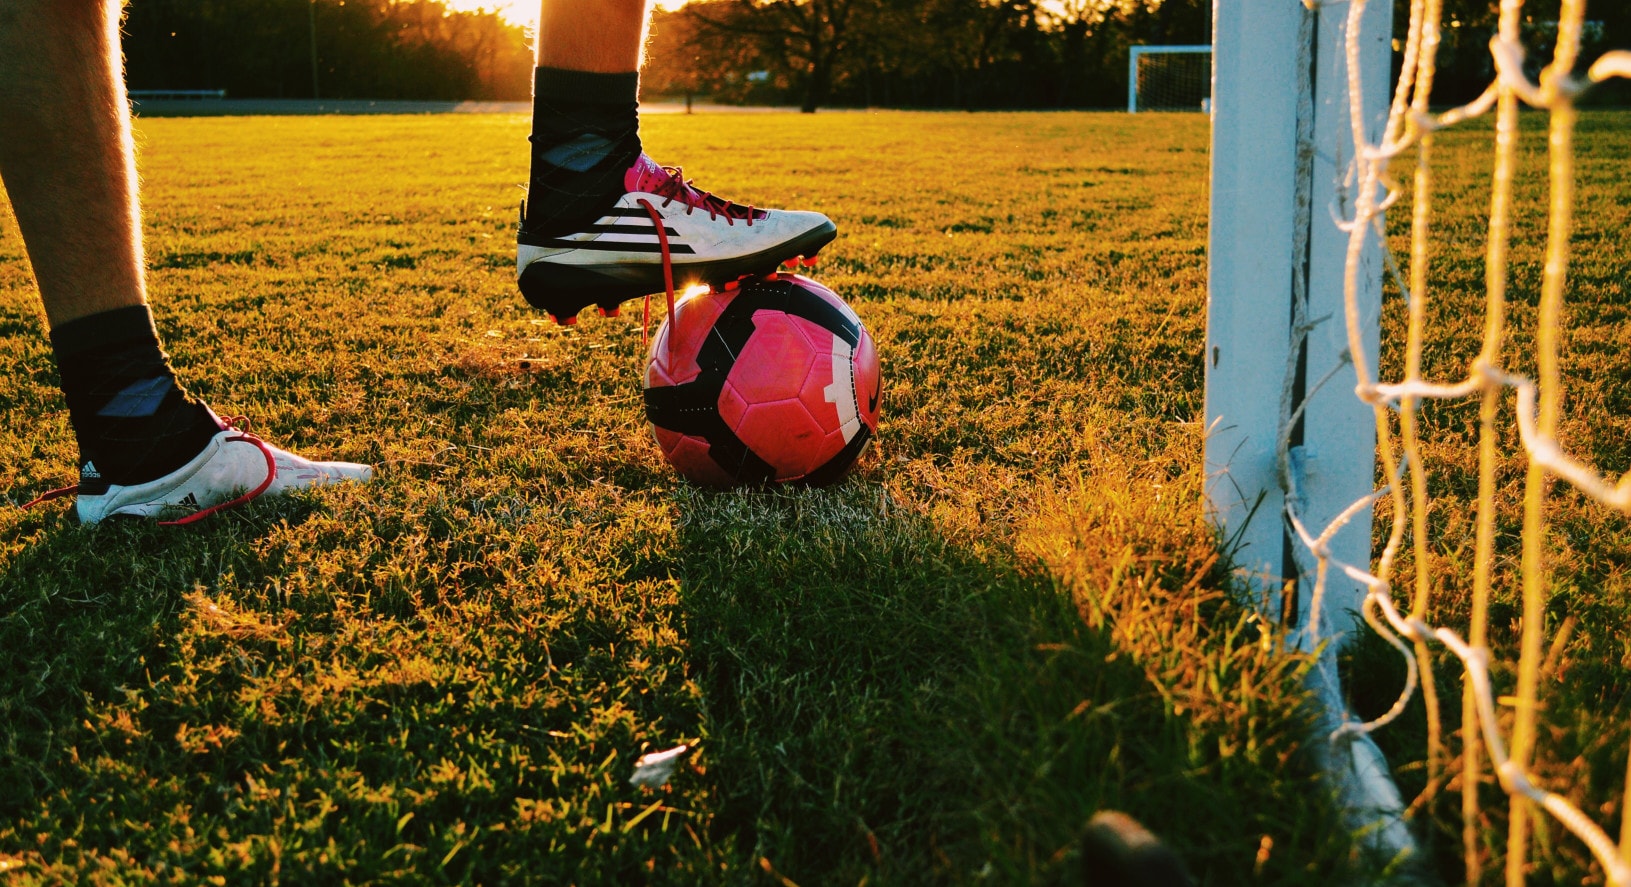 Photo of a soccer player wearing cleats, resting a foot on a soccer ball on a field next to a goal. The lighting in the photo suggests sunset.